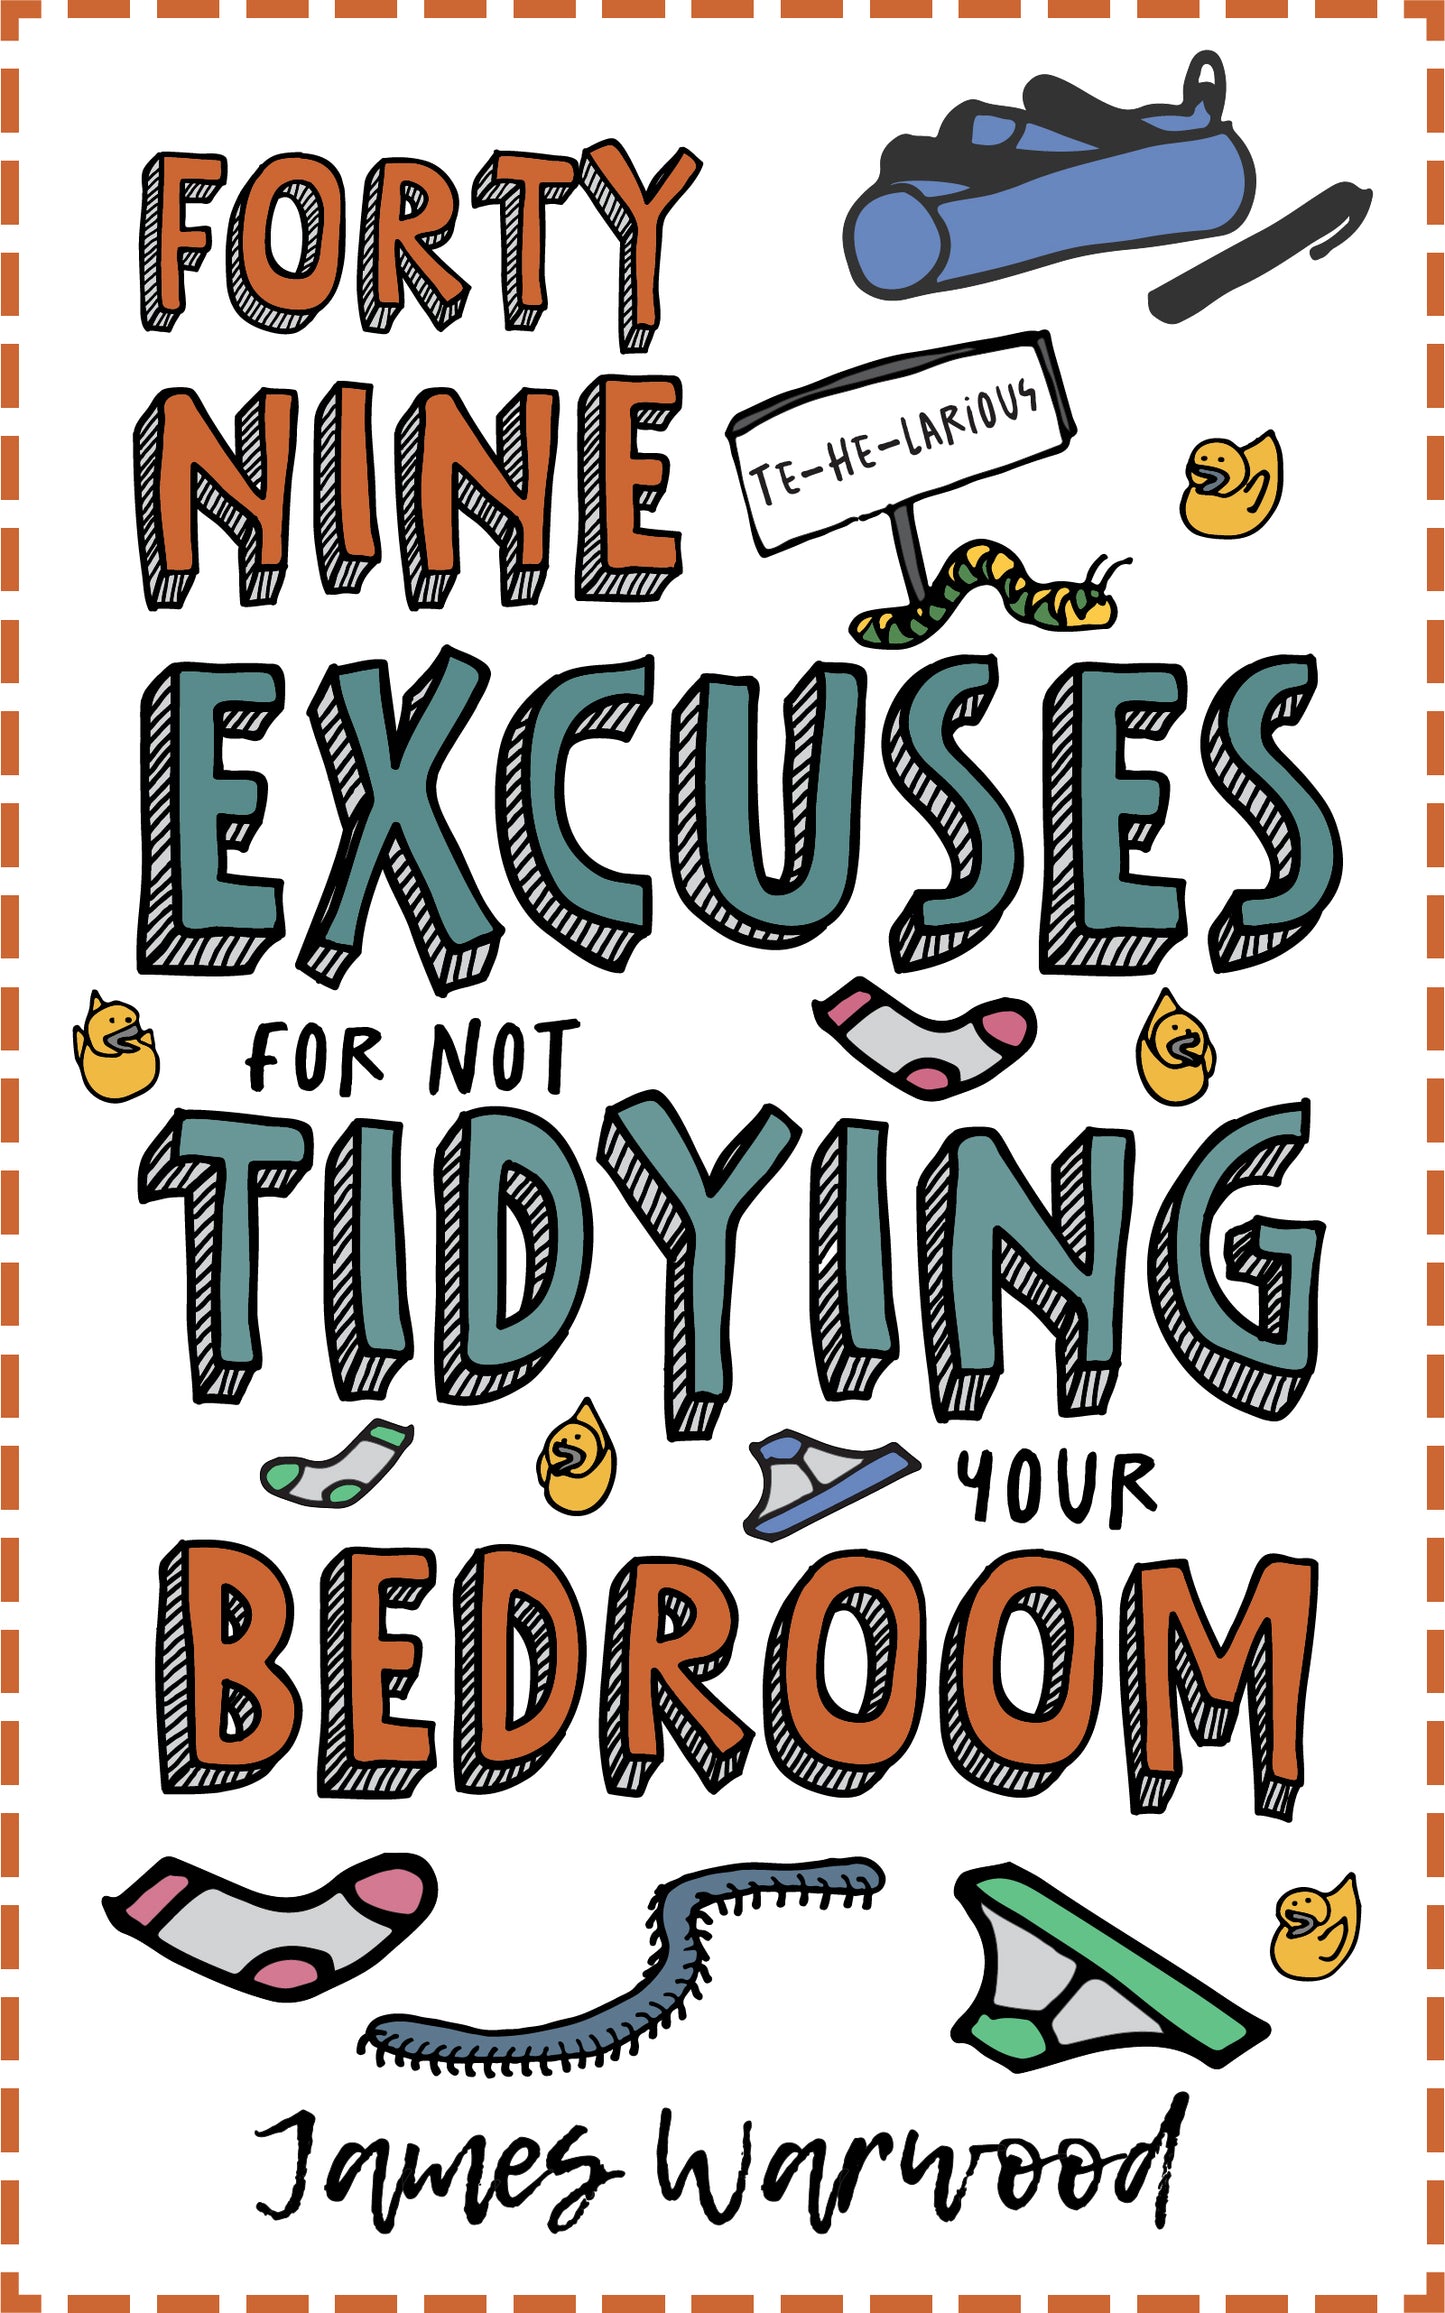 49 Excuses for Not Tidying Your Bedroom